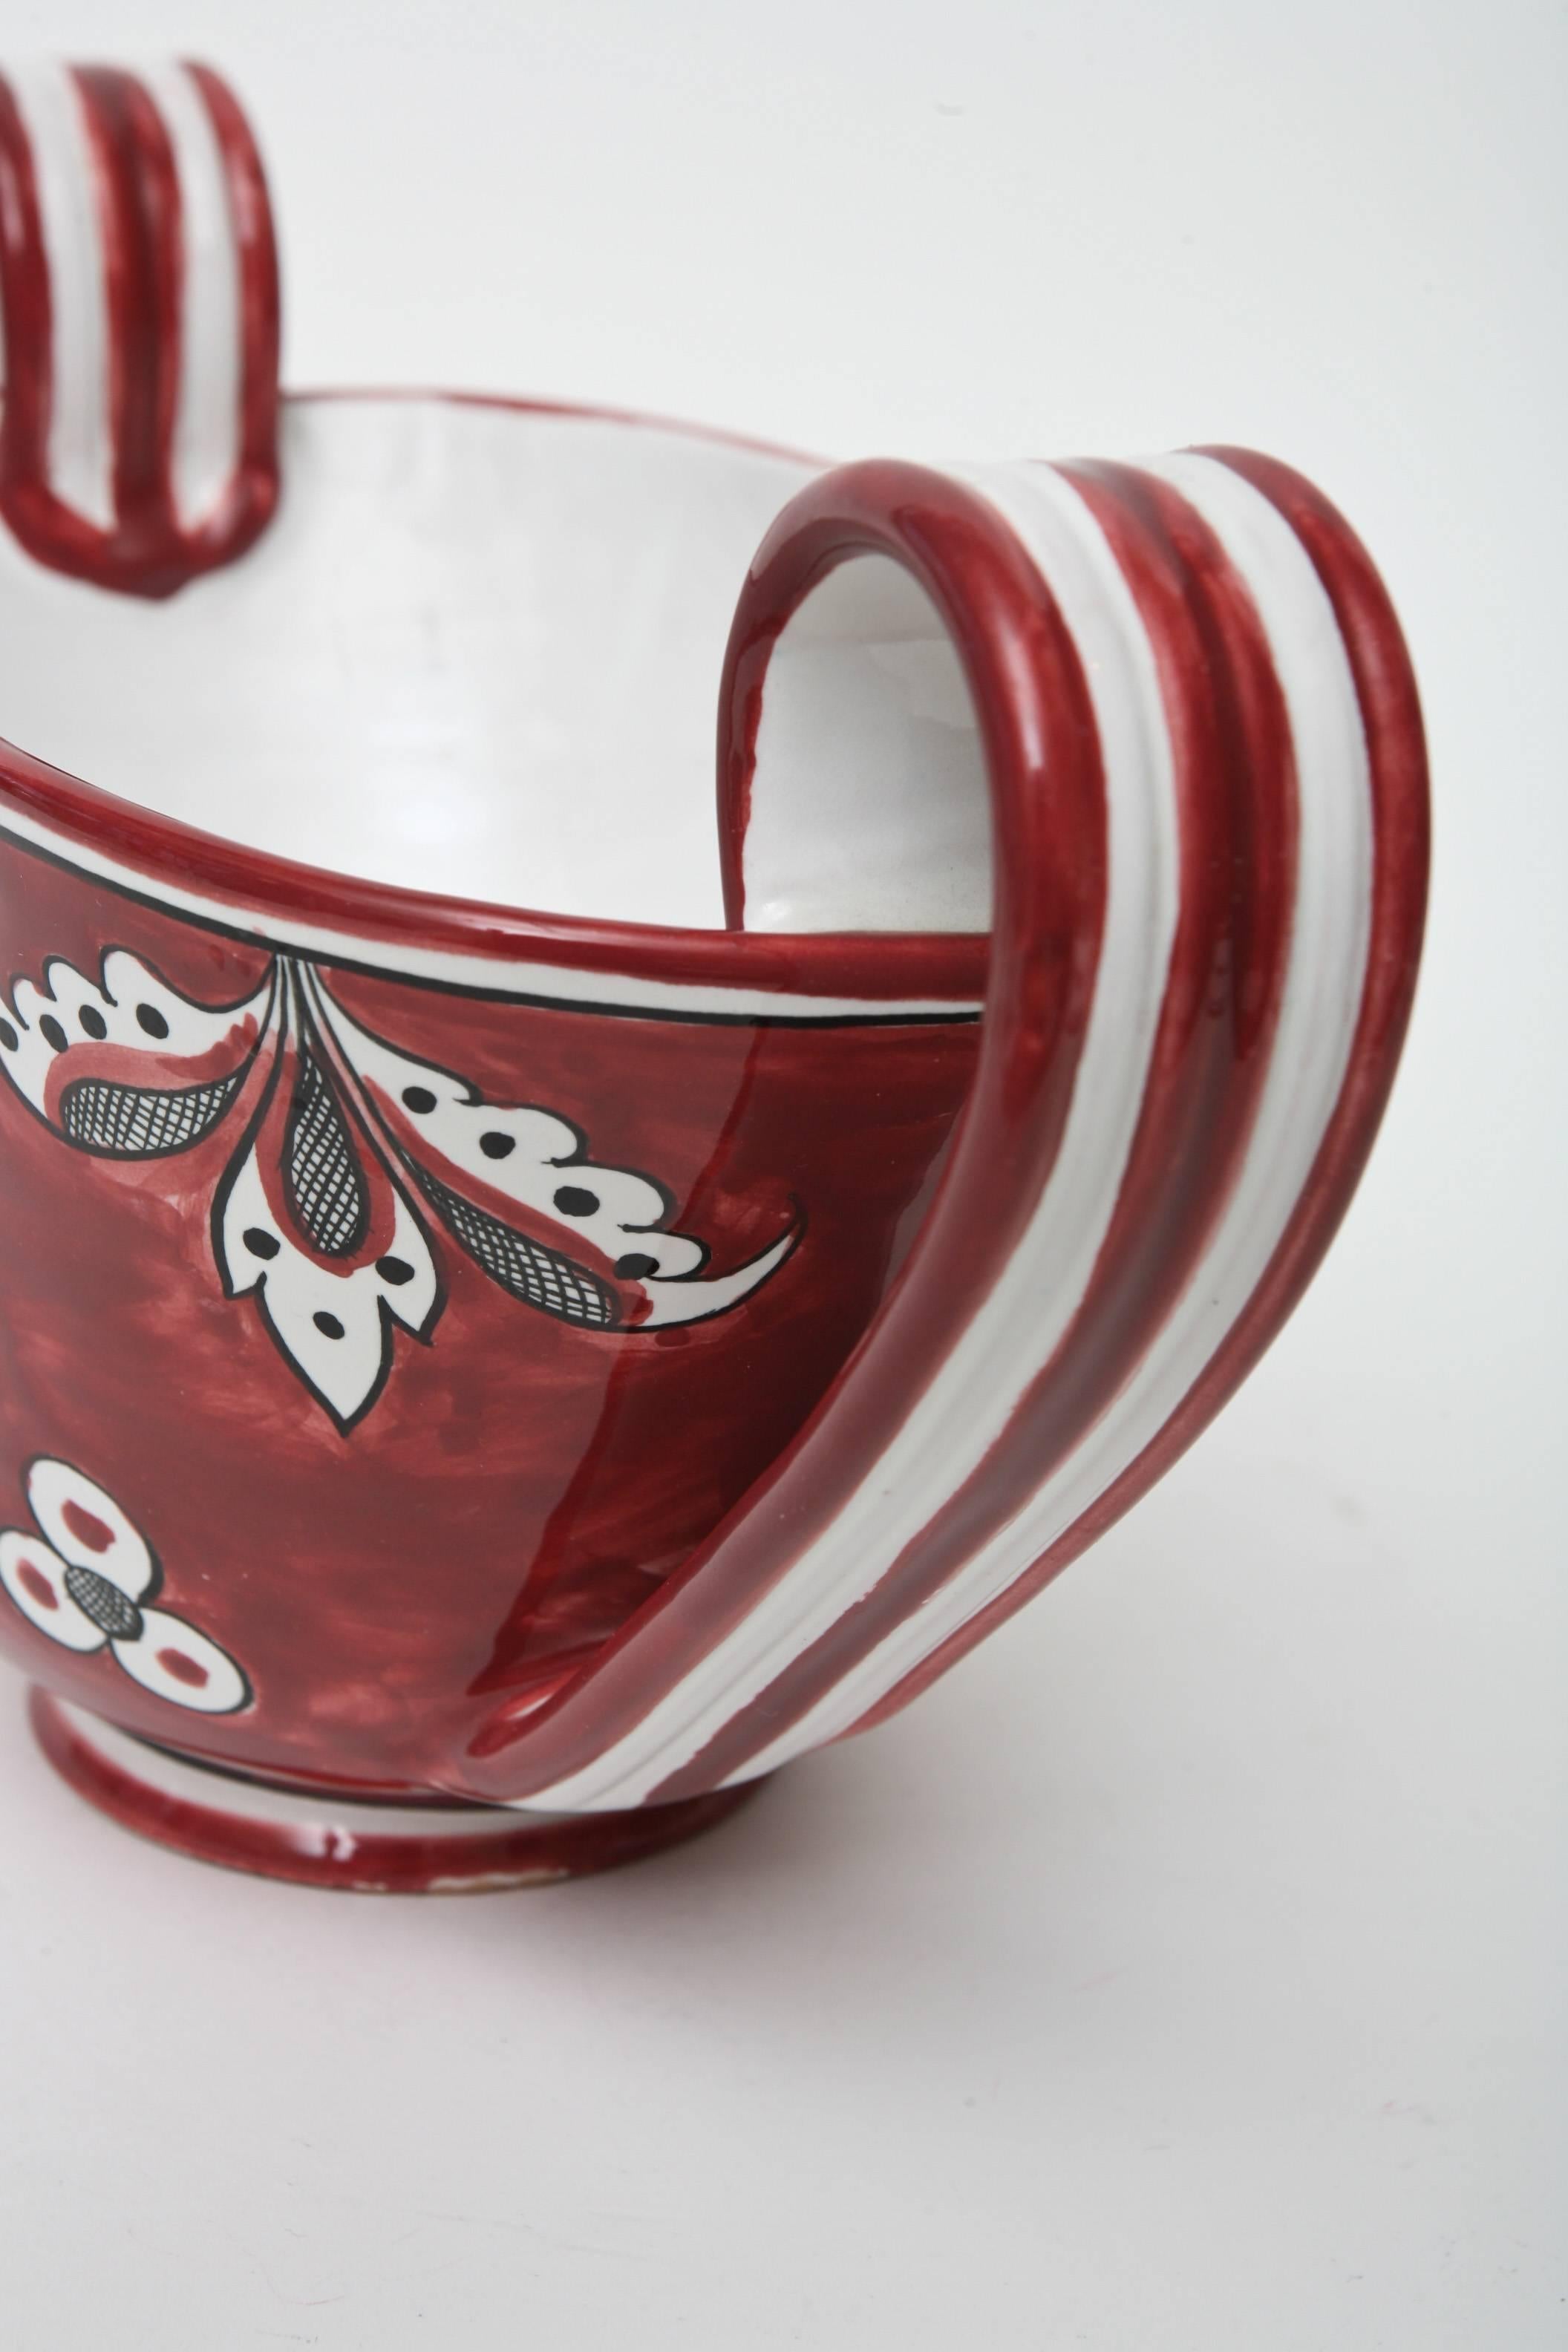 Mid-20th Century Signed Italian Glazed Red, White, Black Ceramic Jester And Birds, Bowl or Vessel For Sale